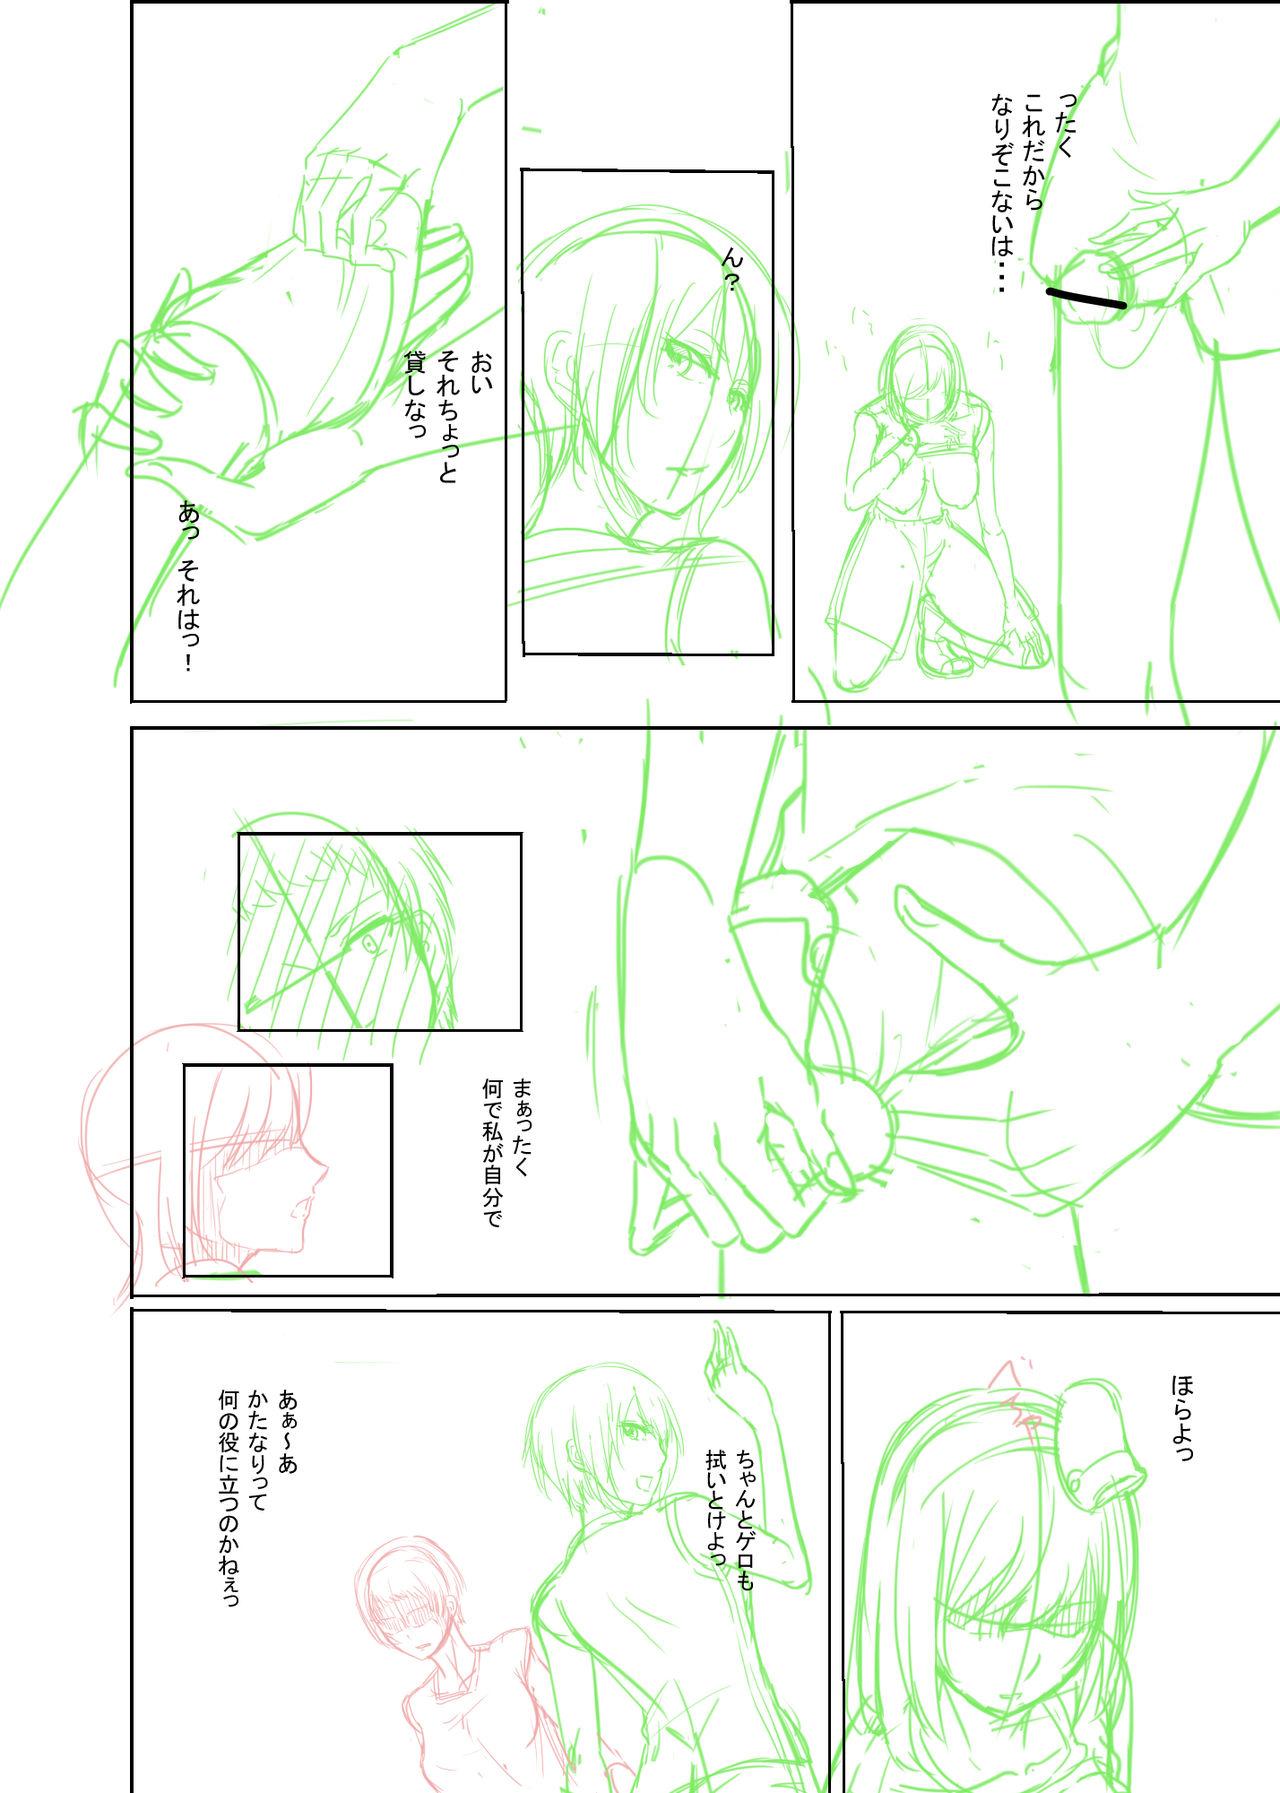 Hot Blow Jobs 僕の人（落書き） Ex Girlfriends - Page 7